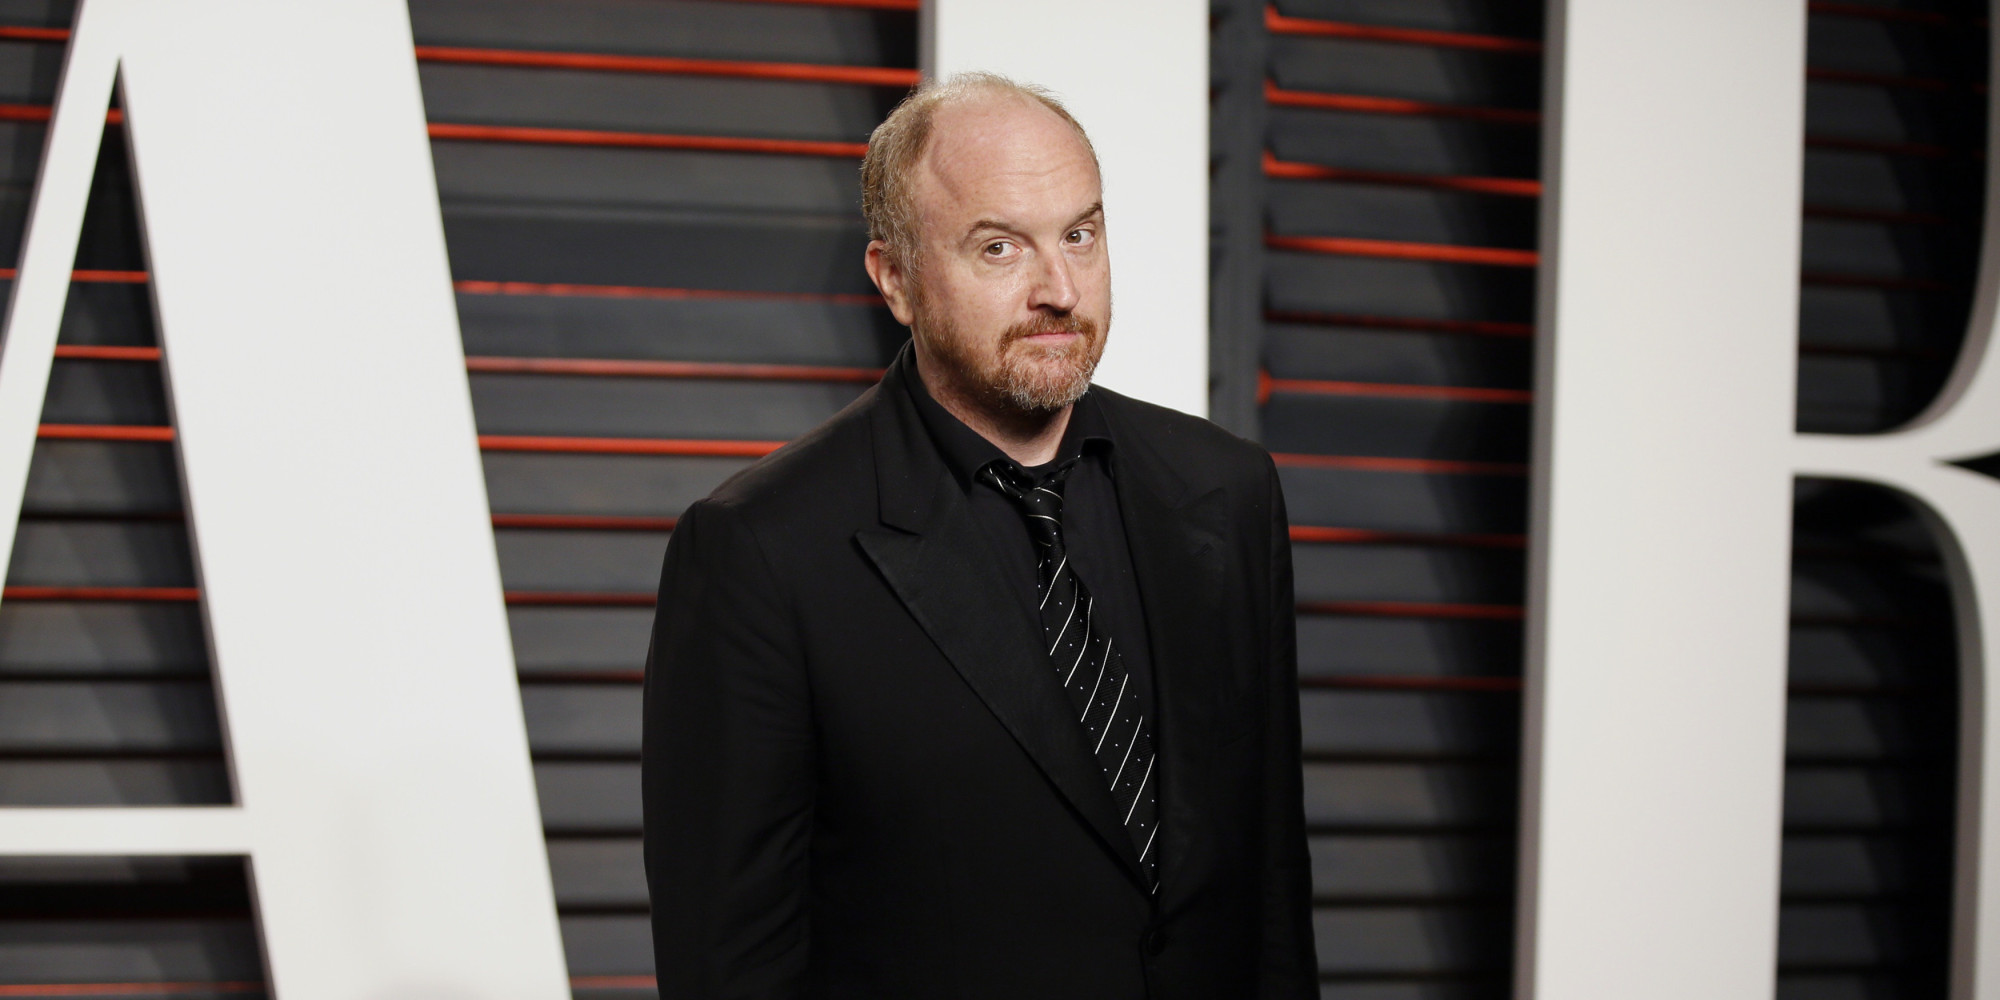 o LOUIS CK facebook life, Louis CK, apology, Woman, RIGHTS, accusations, comedian, SEXUAL HARASSMENT